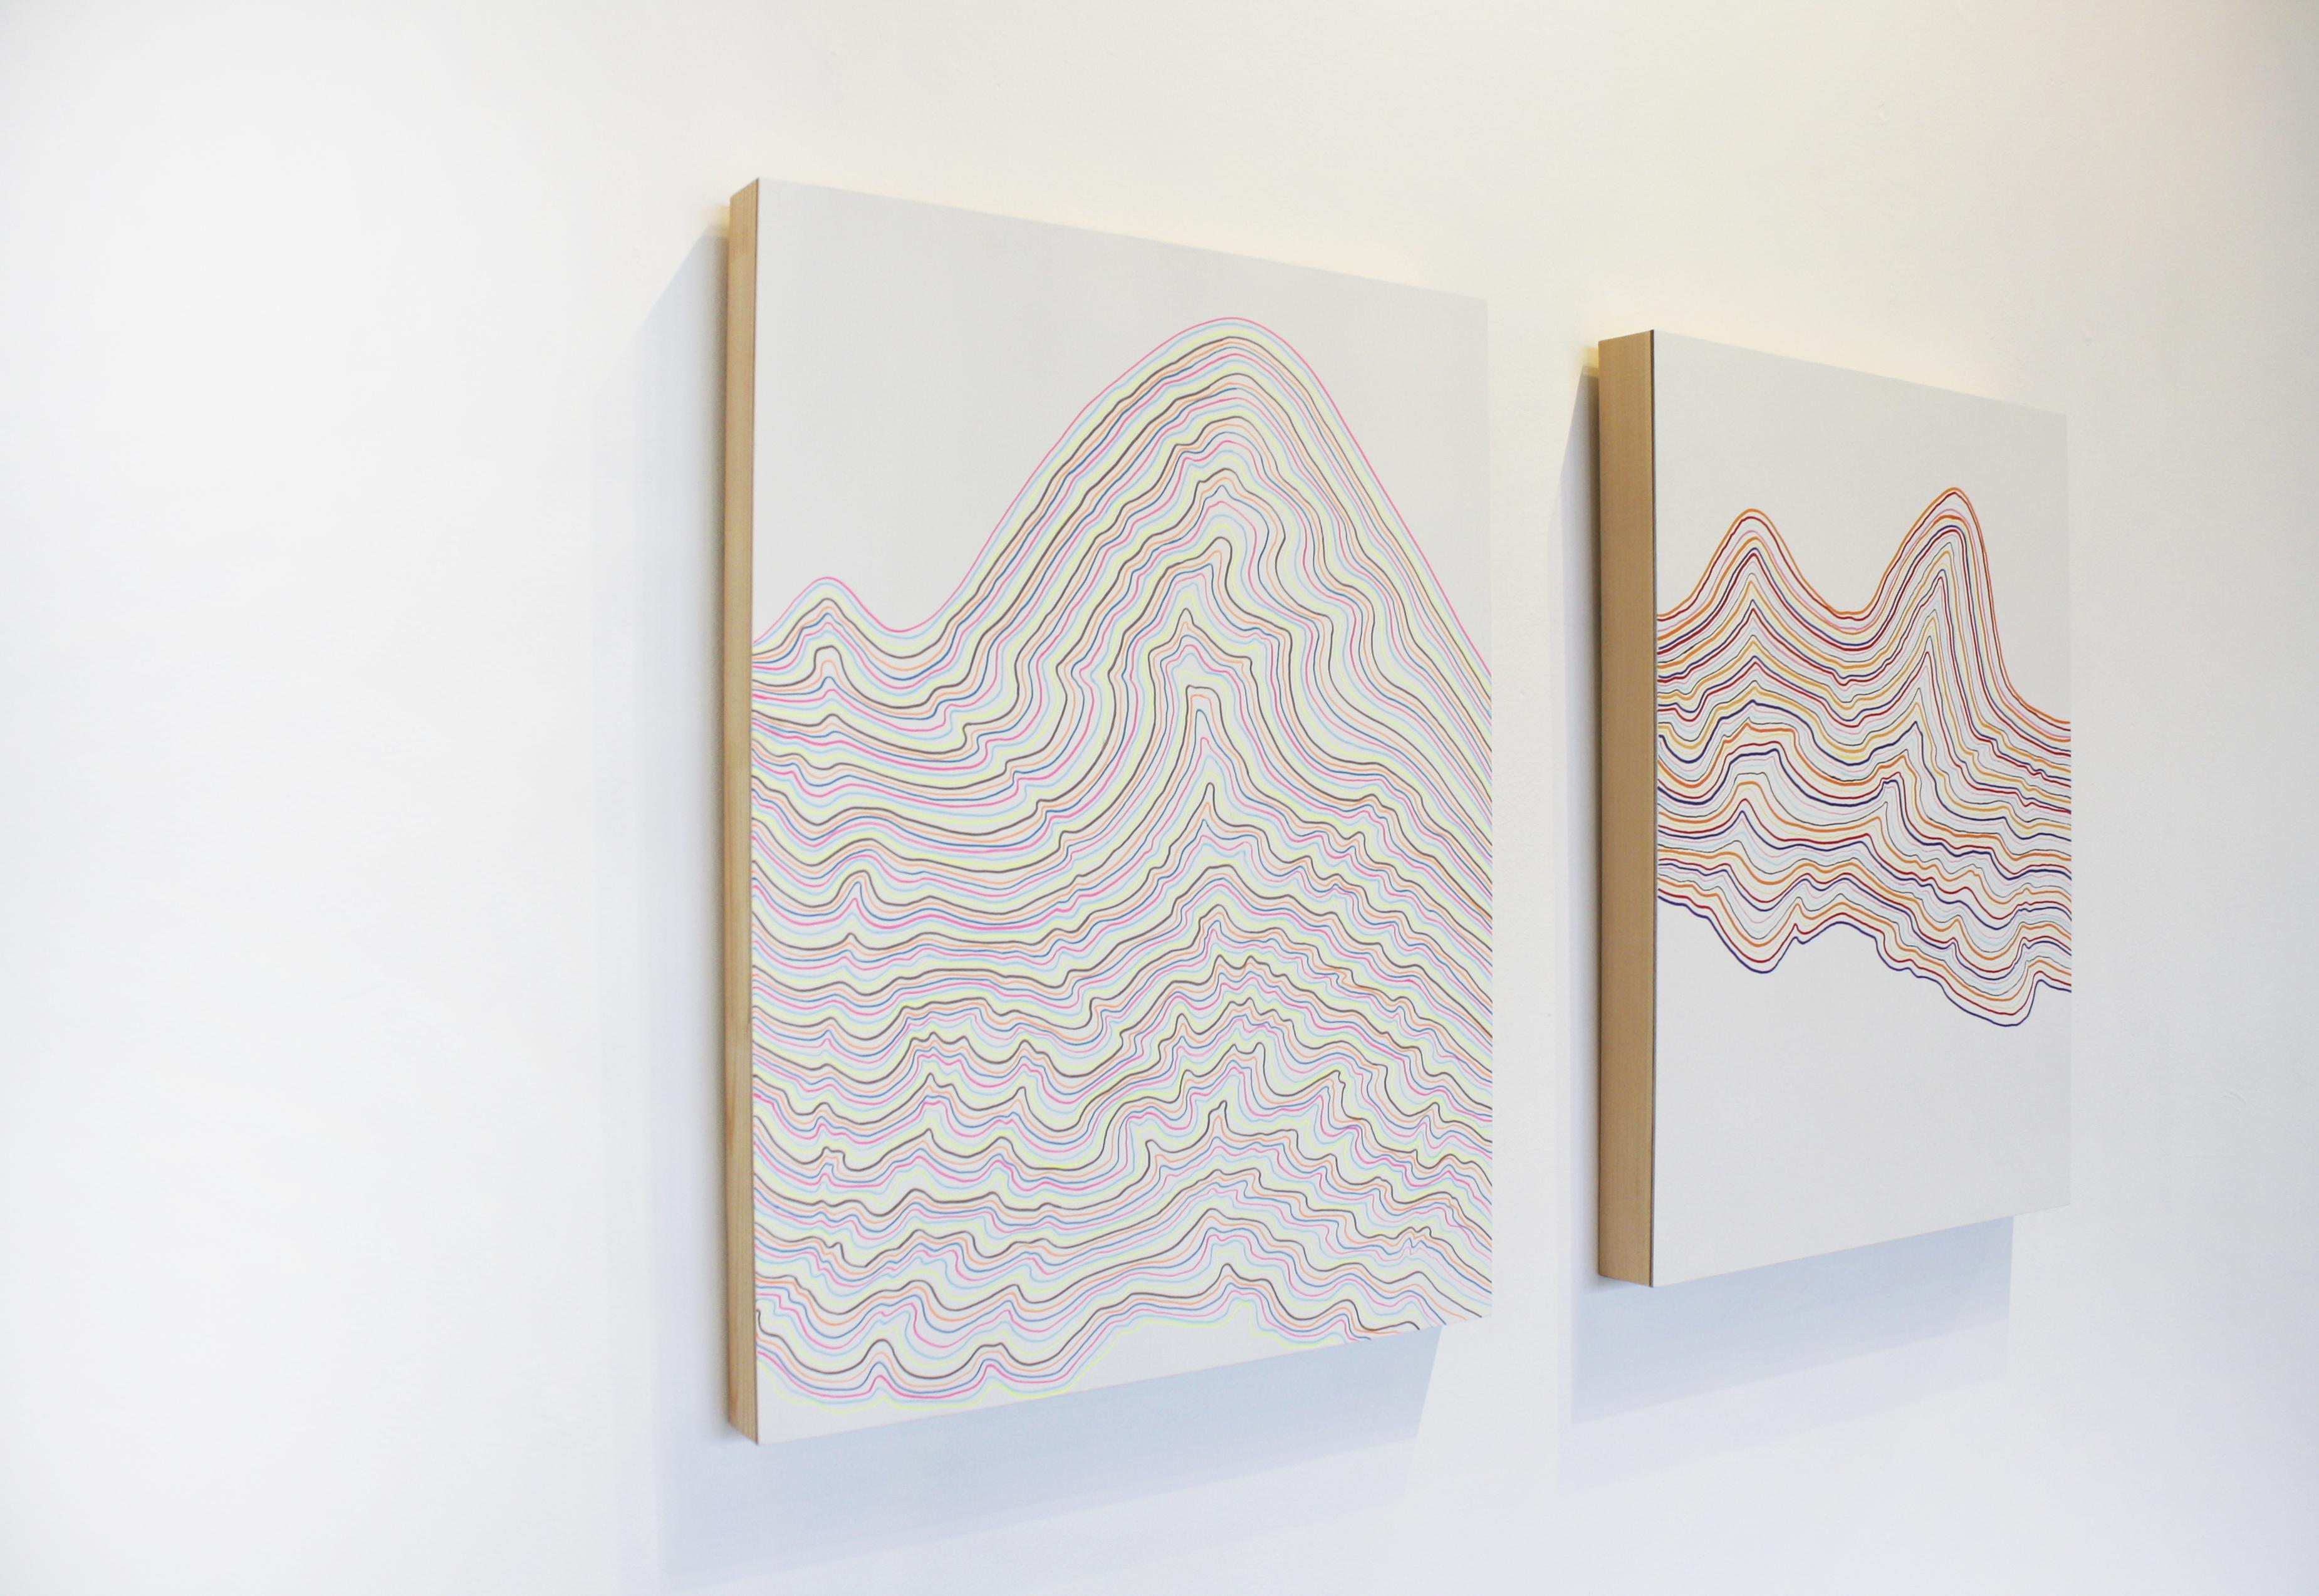 Colorful line drawing on a wood panel by artist Duncan McDaniel. More information below:

Statement:
In this series, Duncan McDaniel incorporates art and design into an intrinsic experience of finding harmony and simplicity in the creative process.